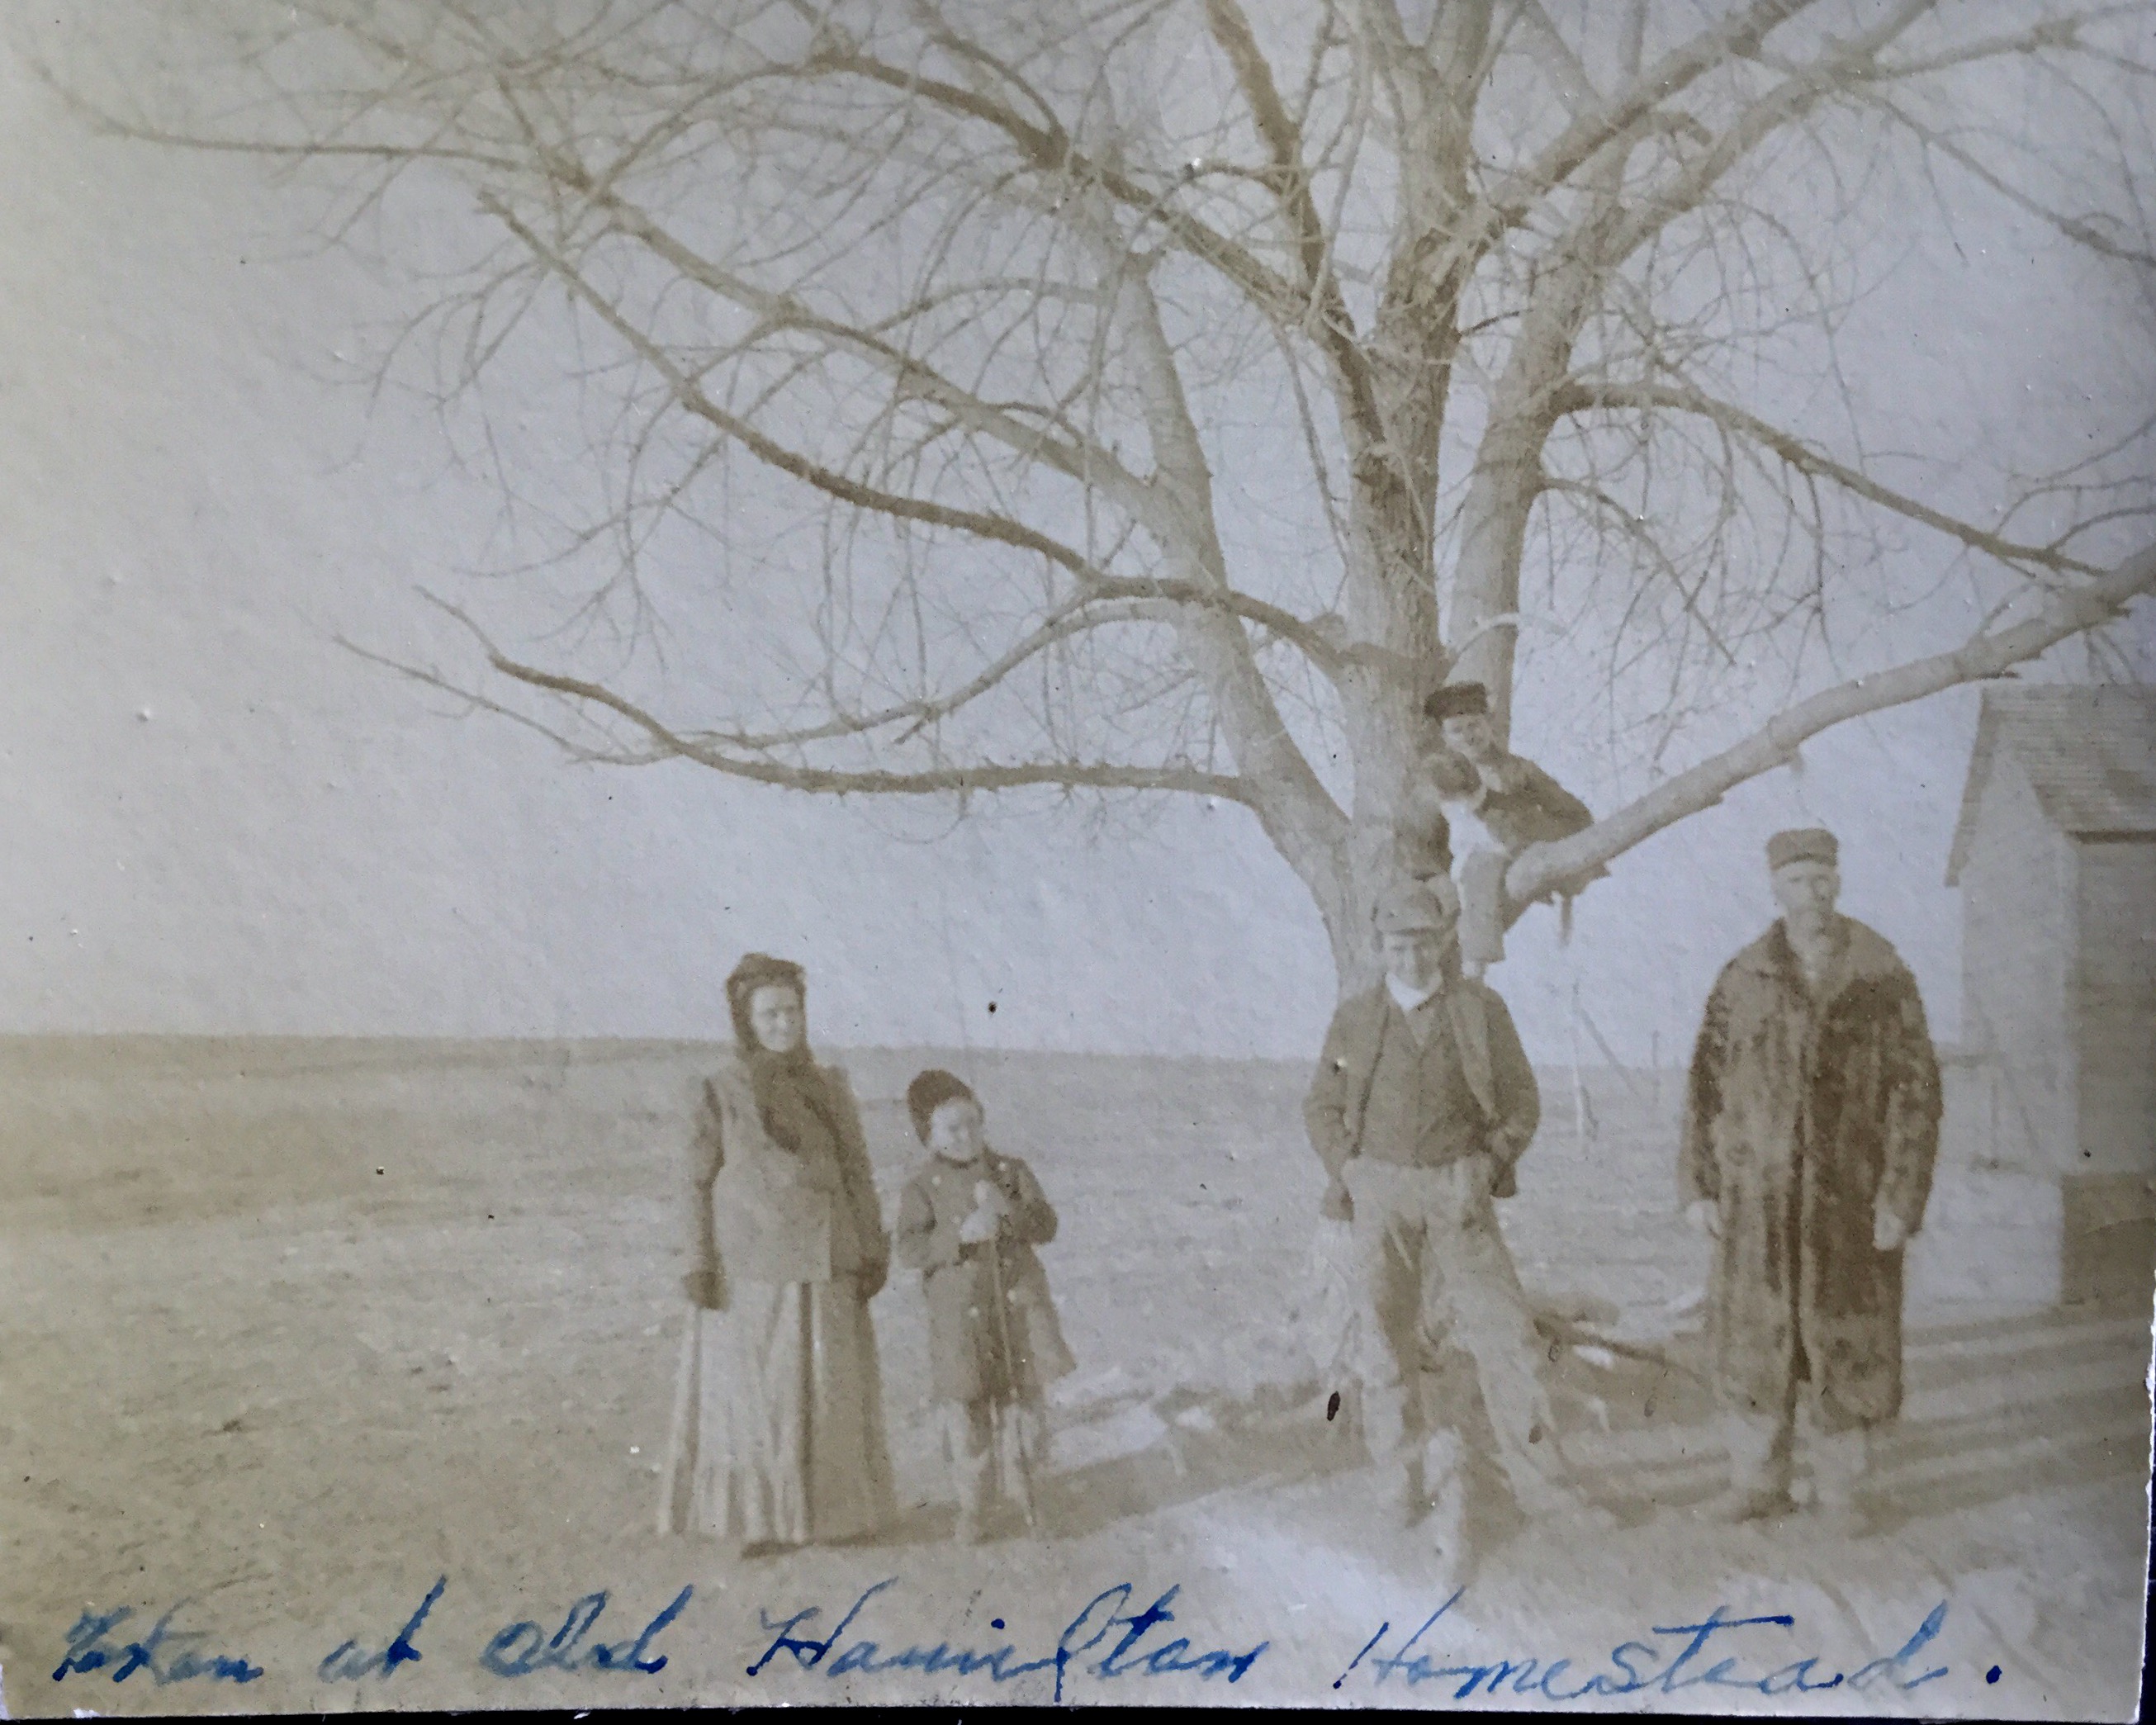 The Hamiltons are Laverne McMichael's great grandparents.  The family crossed the country via covered wagon arriving in NE in 1886 and included their 16 year old daughter Zella, mother of Joyous Viersen Chase.